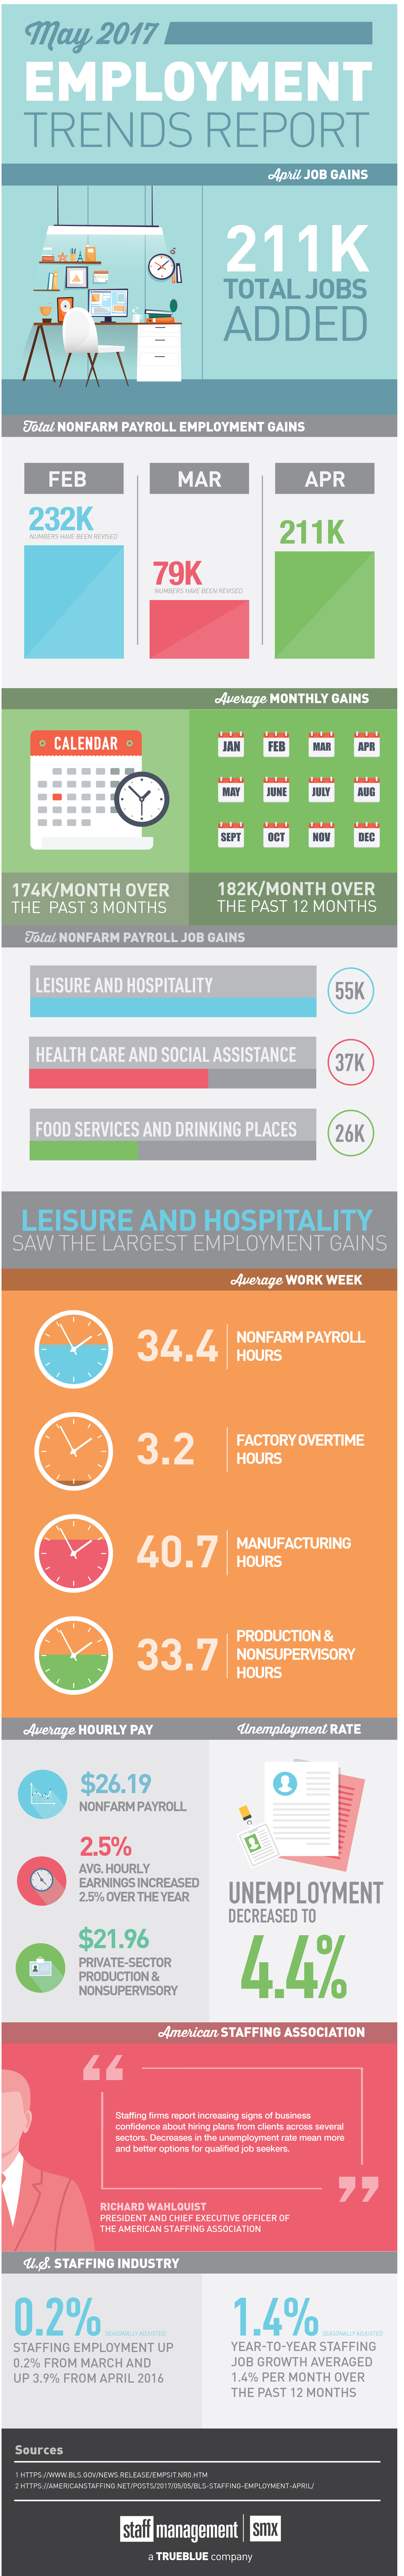 May-Employment-Trends-Infographic